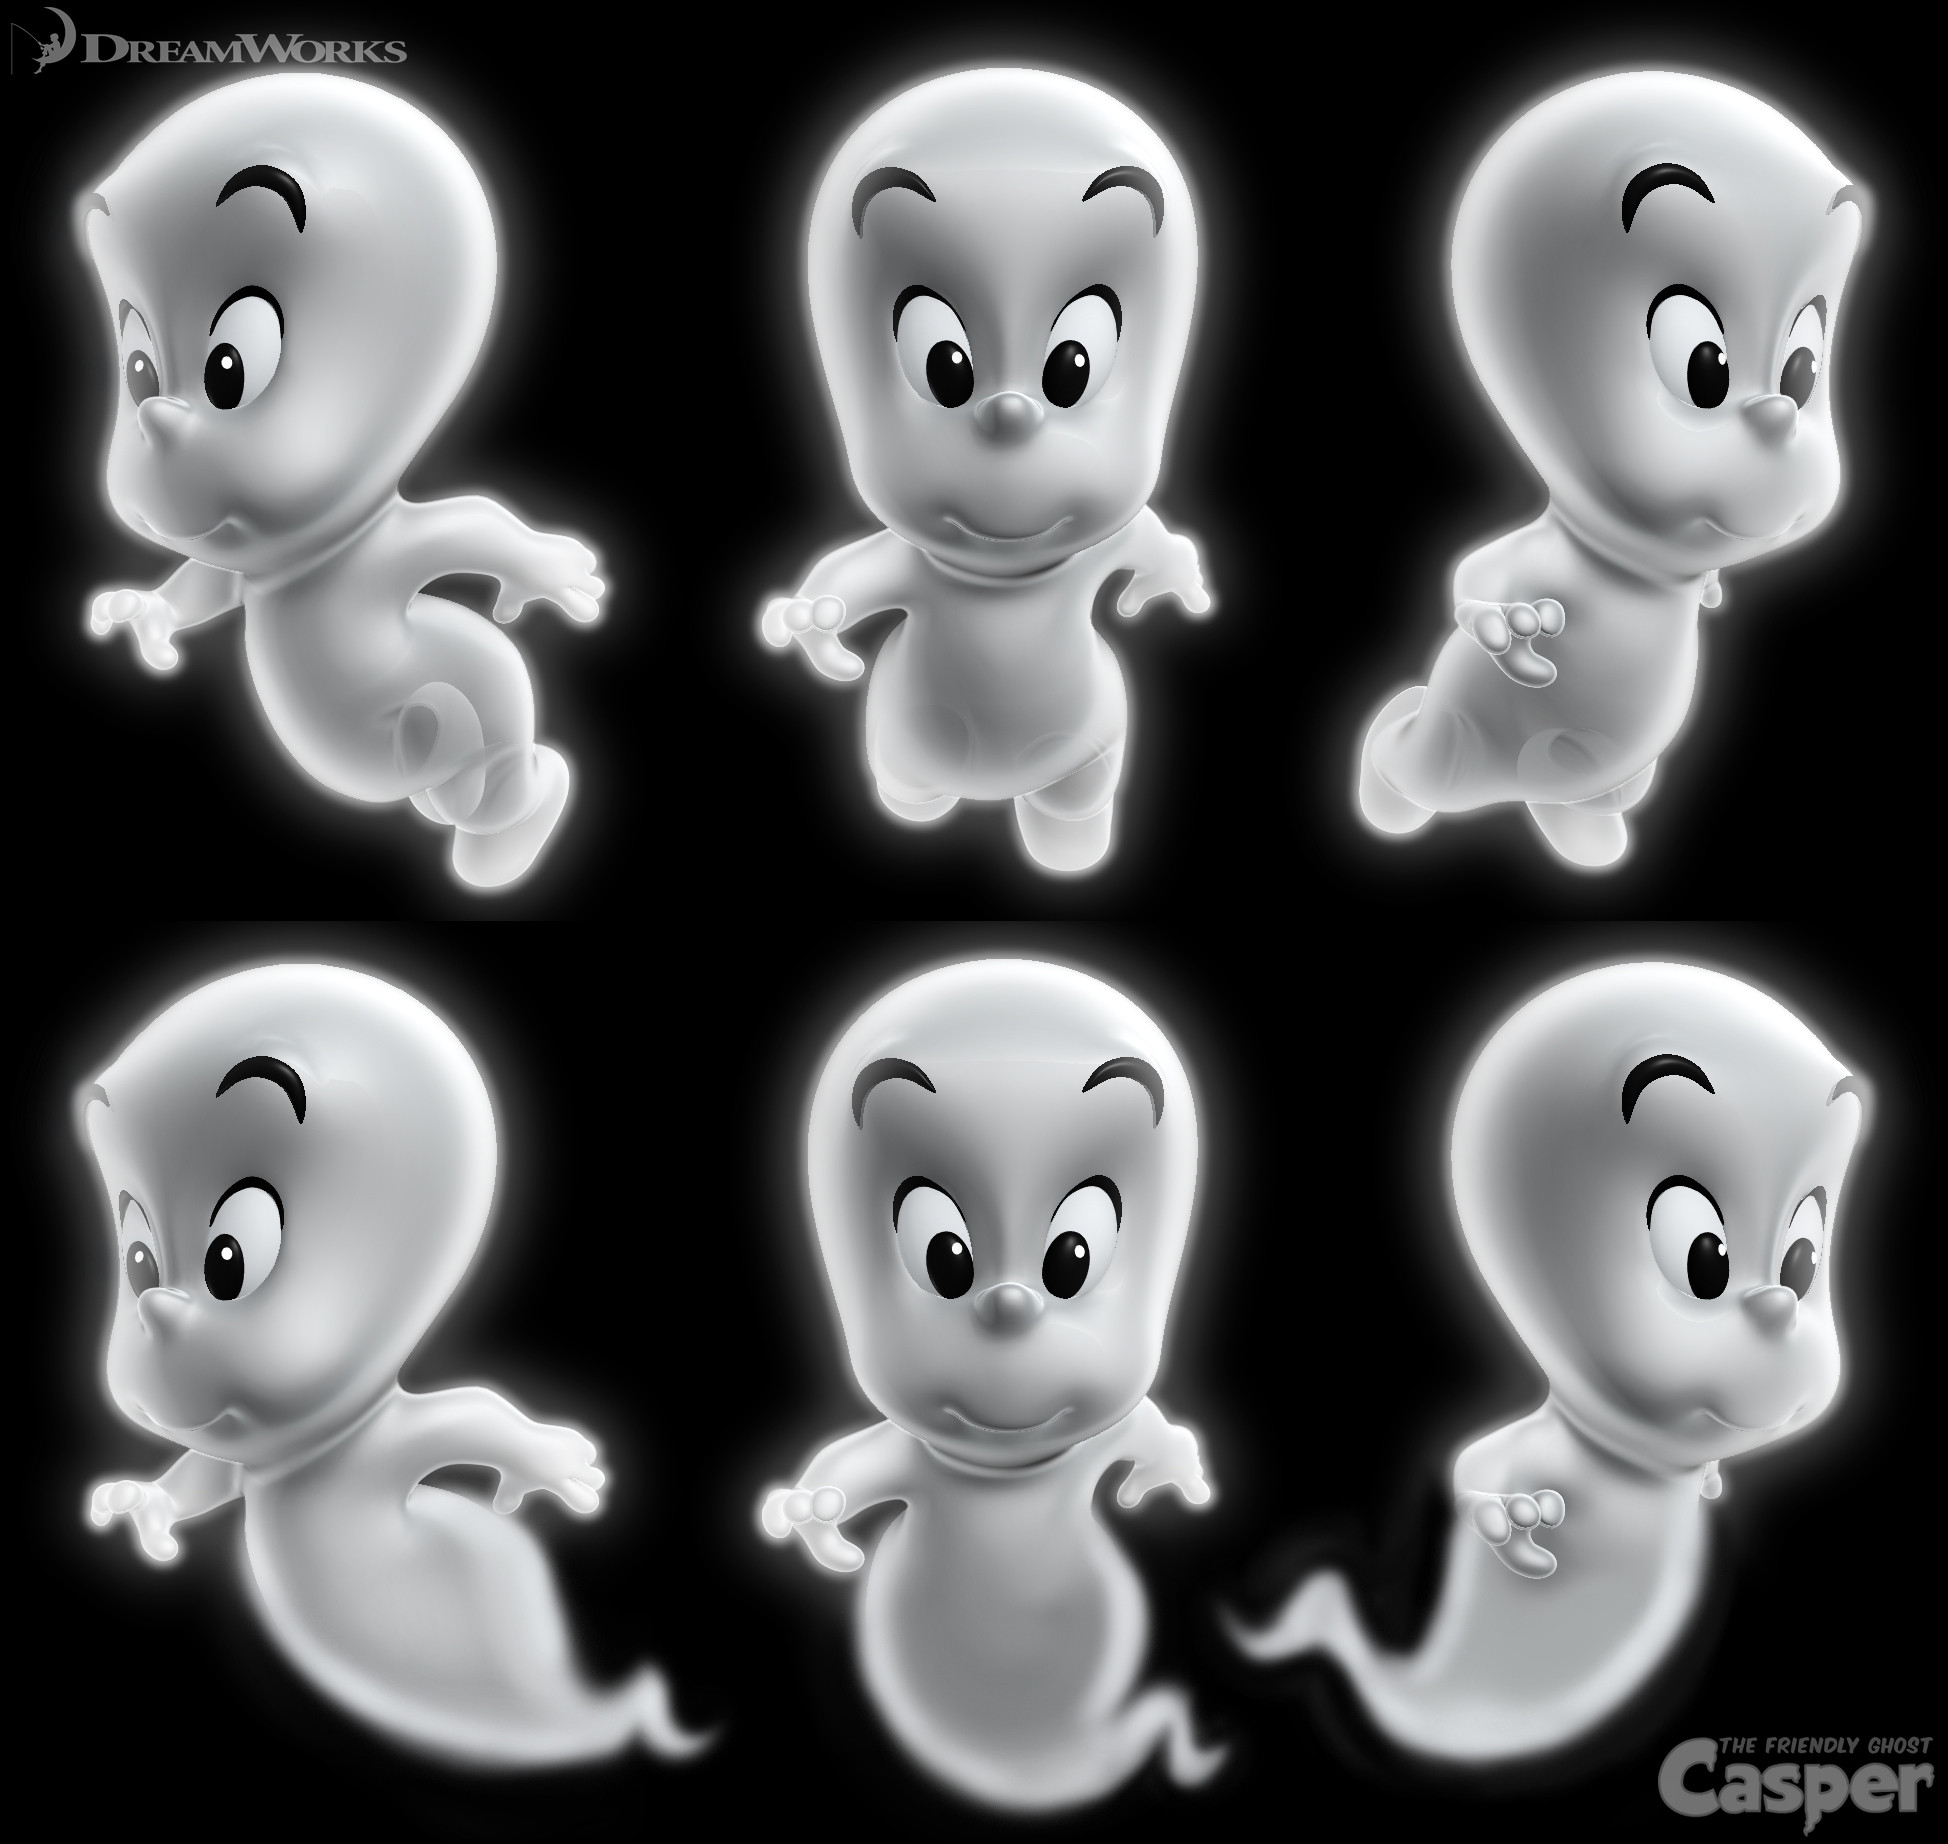 Concept Maquettes Casper the Friendly Ghost (cancelled project)